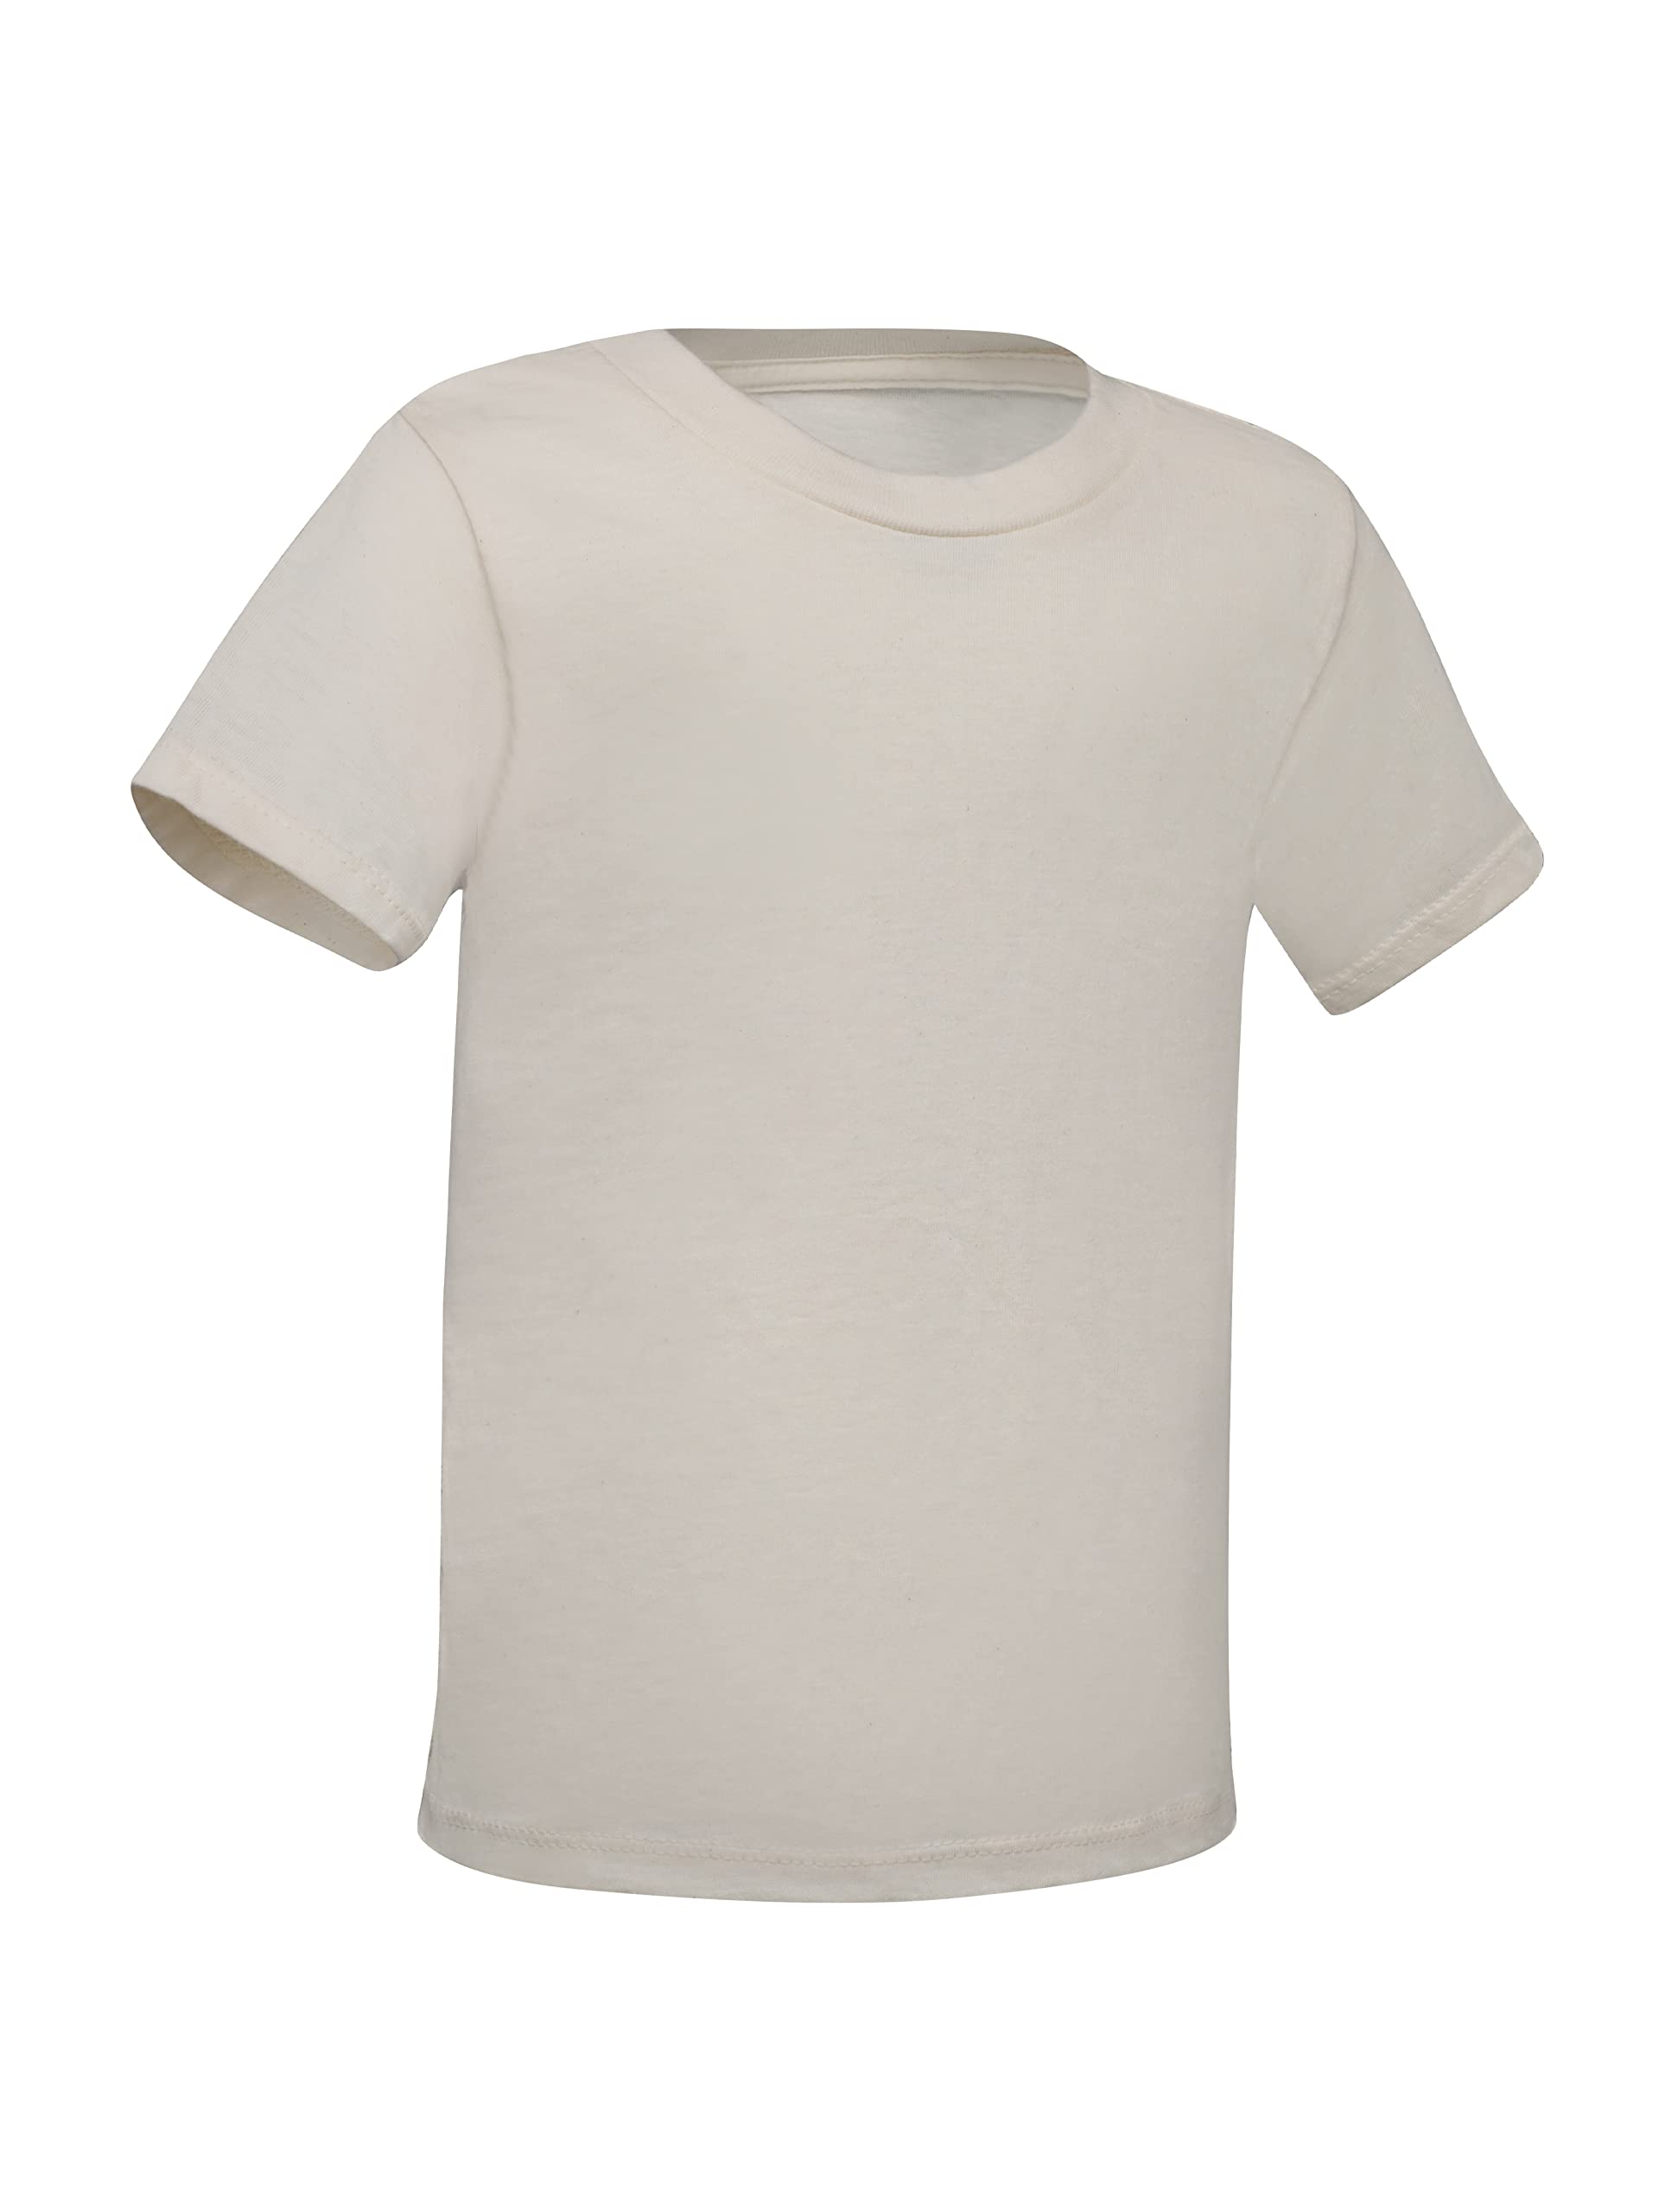 Fruit of the Loom Boys' Eversoft Cotton Undershirts, T Shirts & Tank Tops